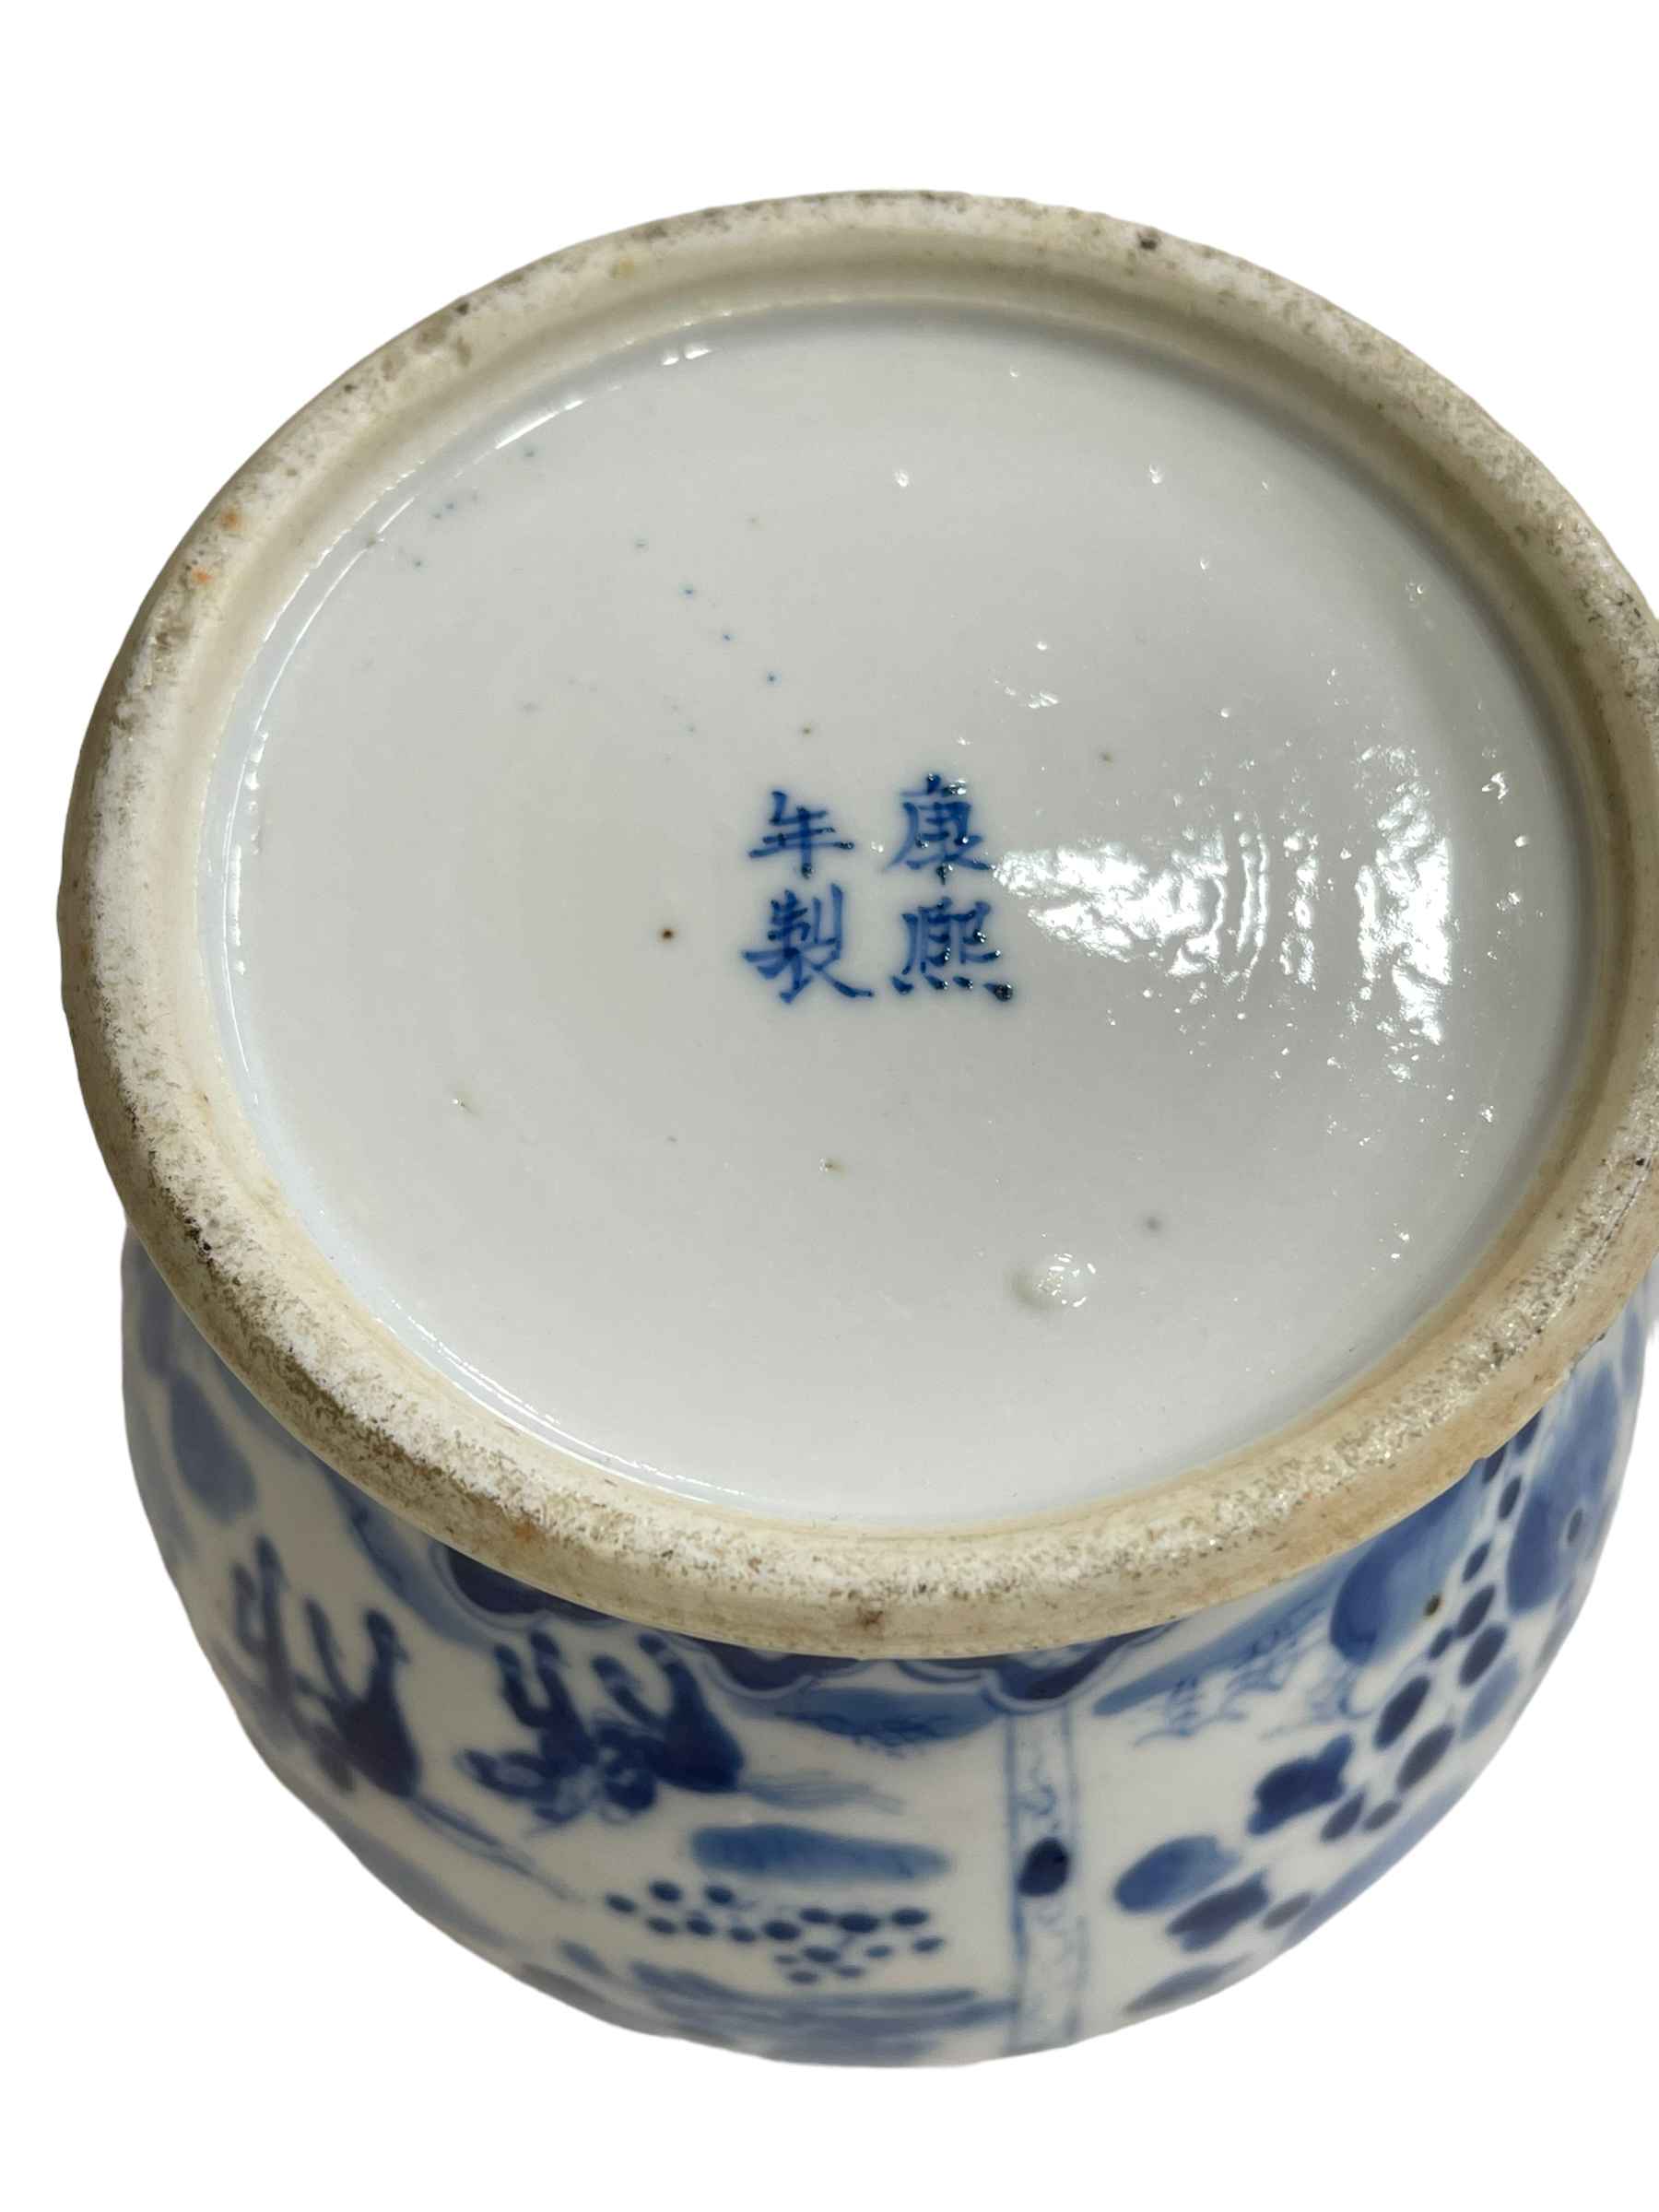 Chinese porcelain blue and white vase on wood stand decorated with horses and riders in landscape, - Image 3 of 3